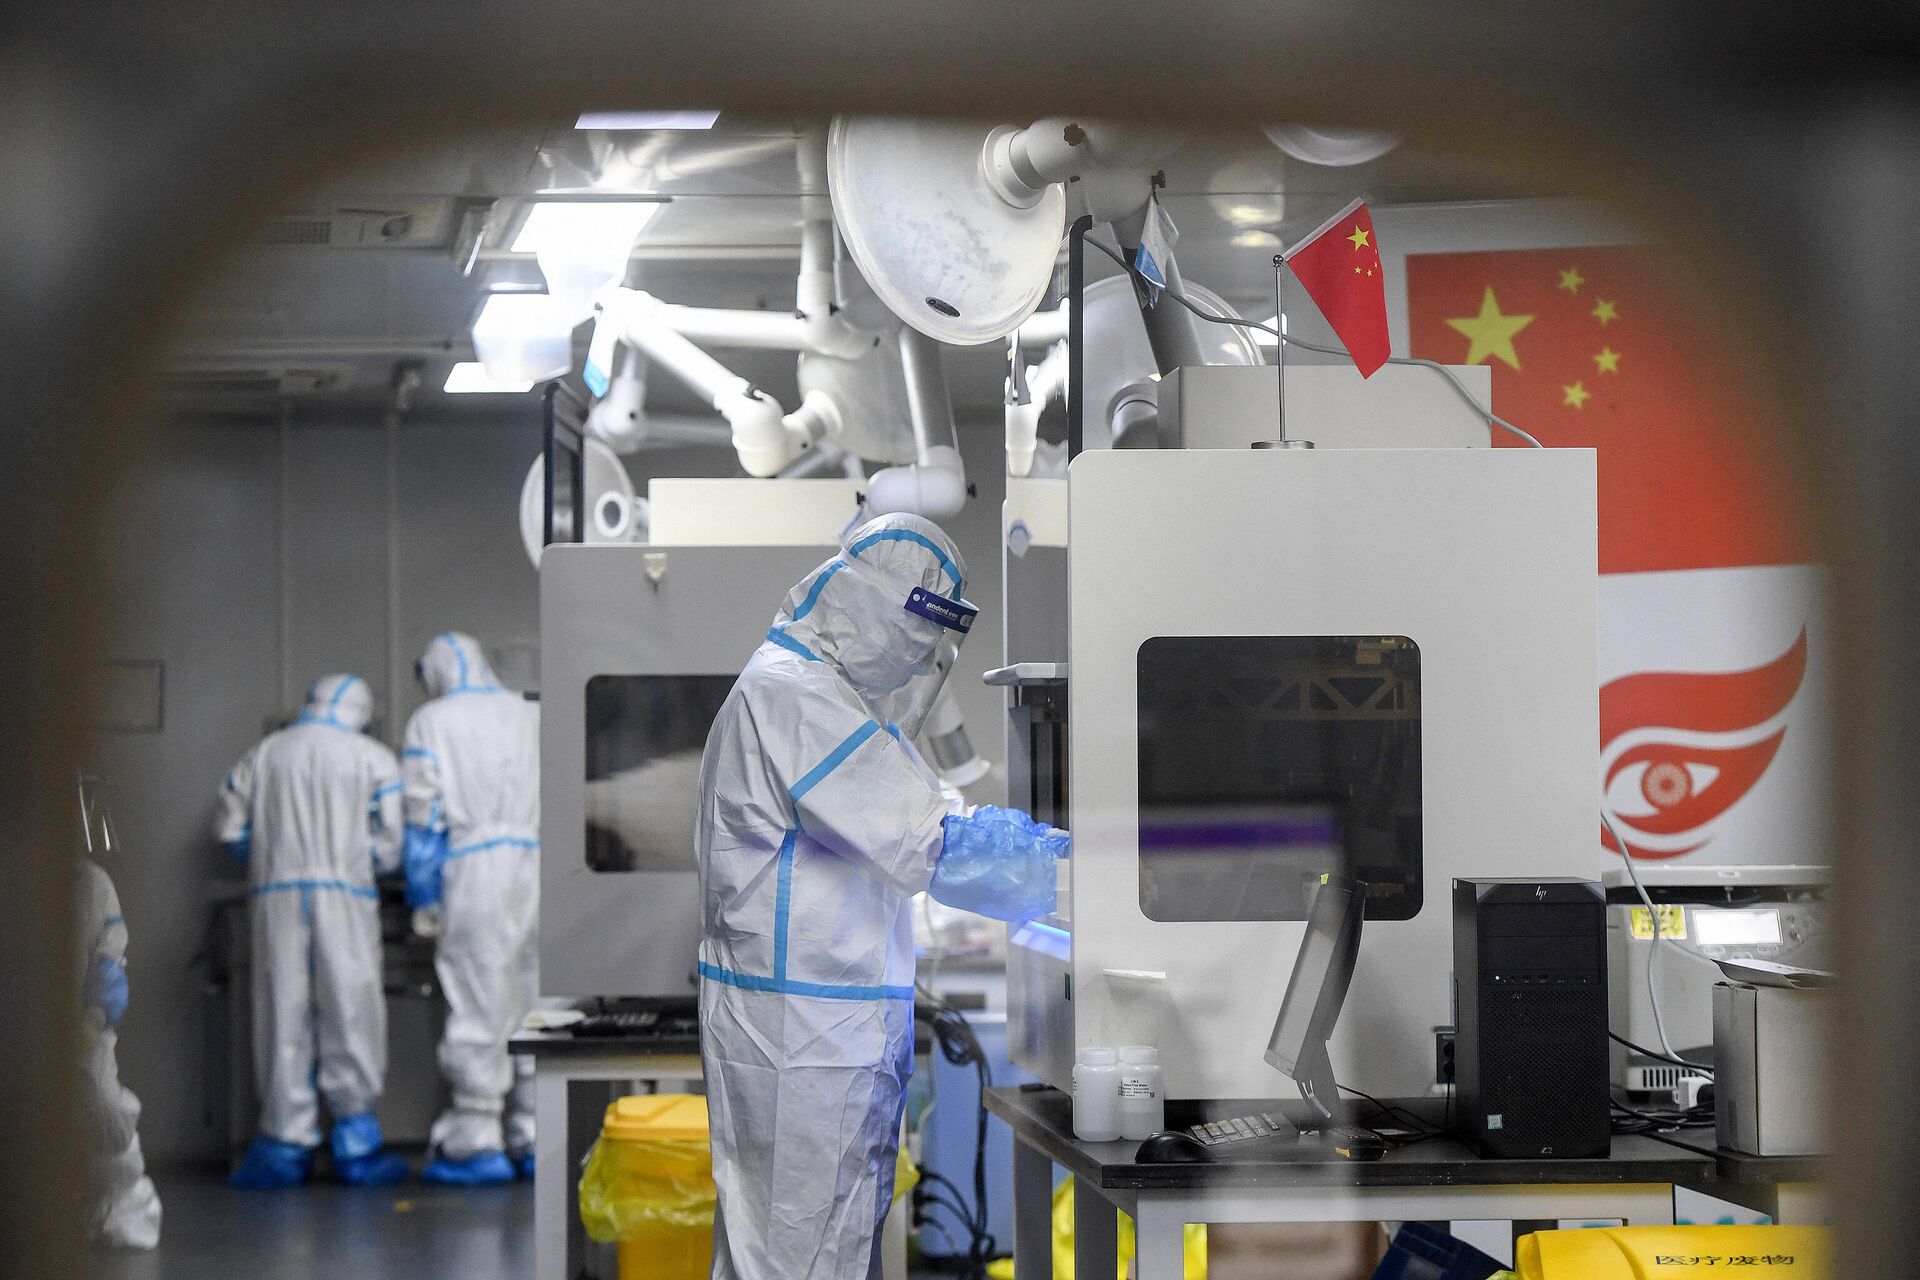 Laboratory technicians wearing personal protective equipment (PPE) work on samples to be tested for the Covid-19 coronavirus at the Fire Eye laboratory, a Covid-19 testing facility, in Wuhan in China's central Hubei province early on August 5, 2021 - Sputnik International, 1920, 10.09.2021